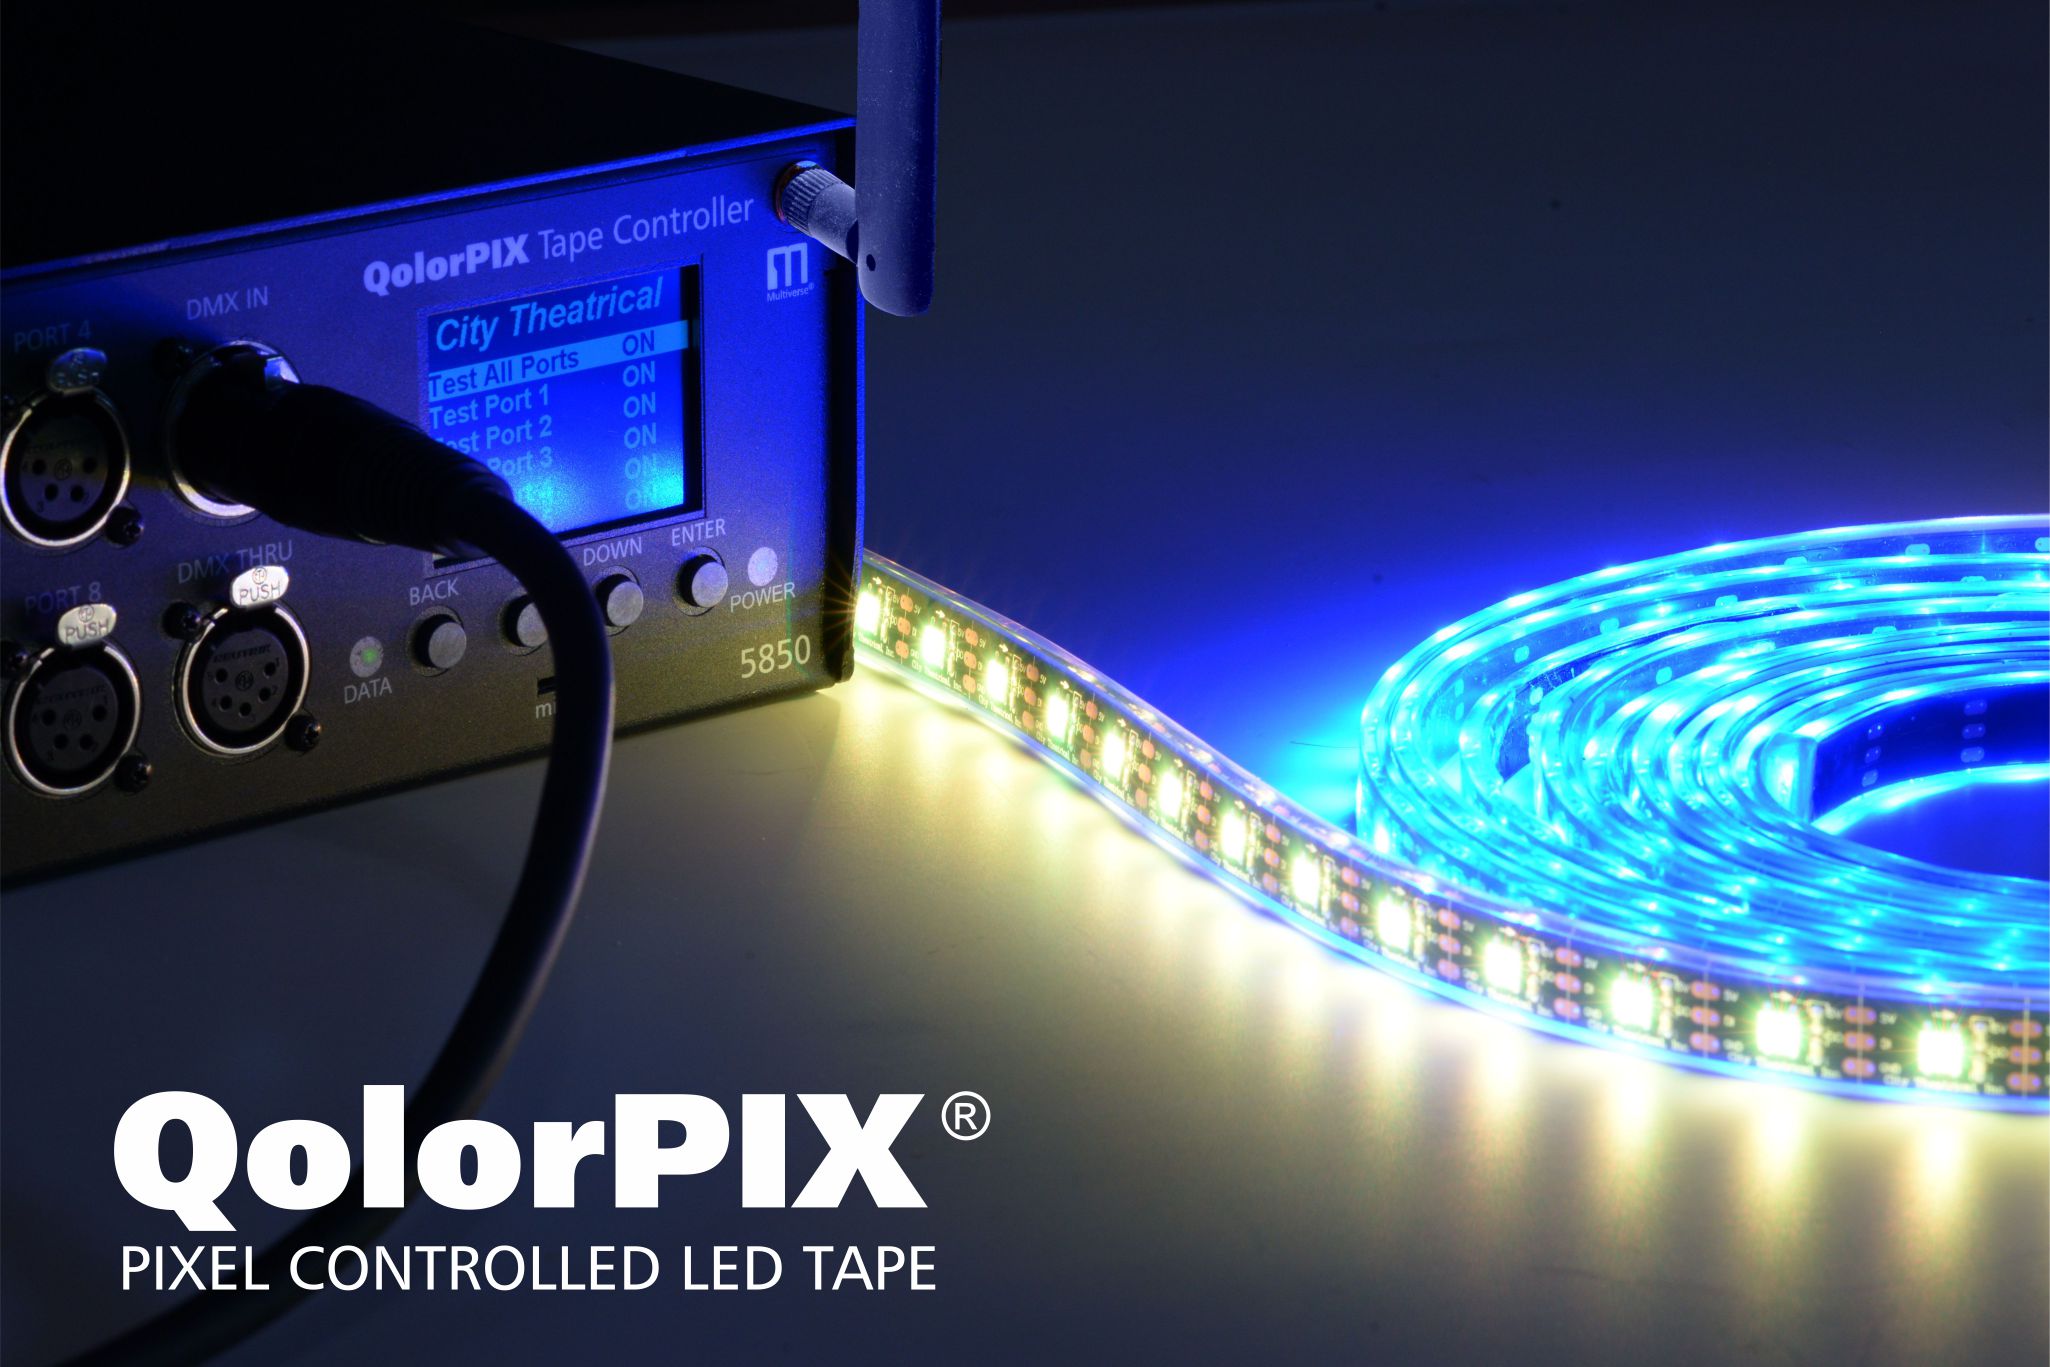 QolorPIX Pixel Controlled LED Tape and Controller